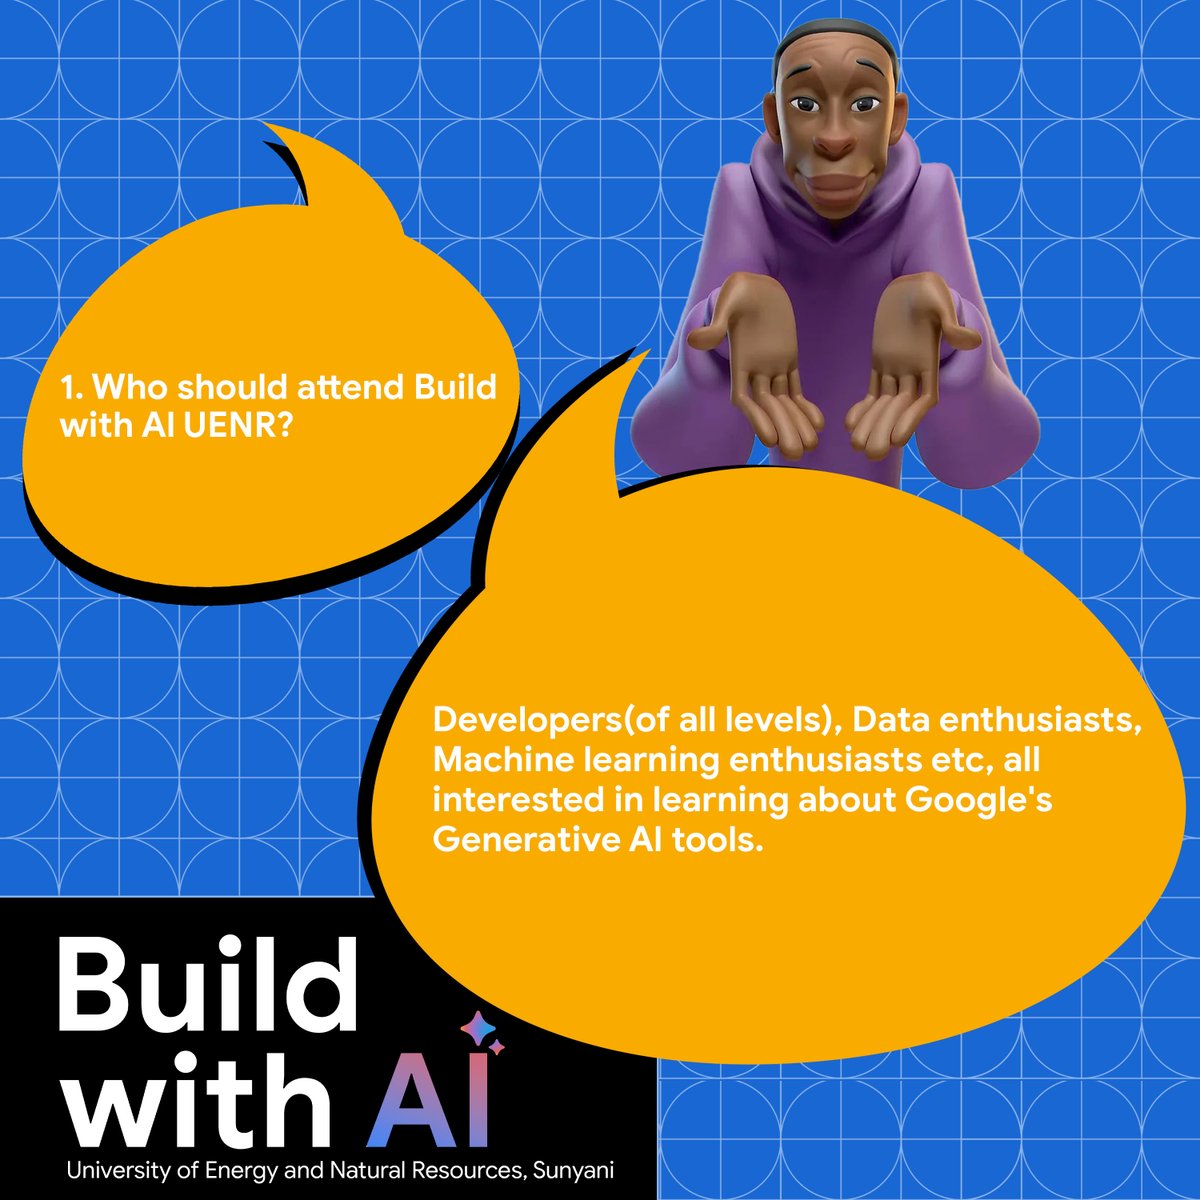 ⬇️Here are some of the frequently asked questions to know more about the #BuildwithAI Workshop .

A thread🧵
.
.
.

 Who should attend Build with AI Roadshows?

#gdsc_uenr #gdscSSA #DeveloperStudentClubs #googlebuildwithAI #buildwithai #gemini